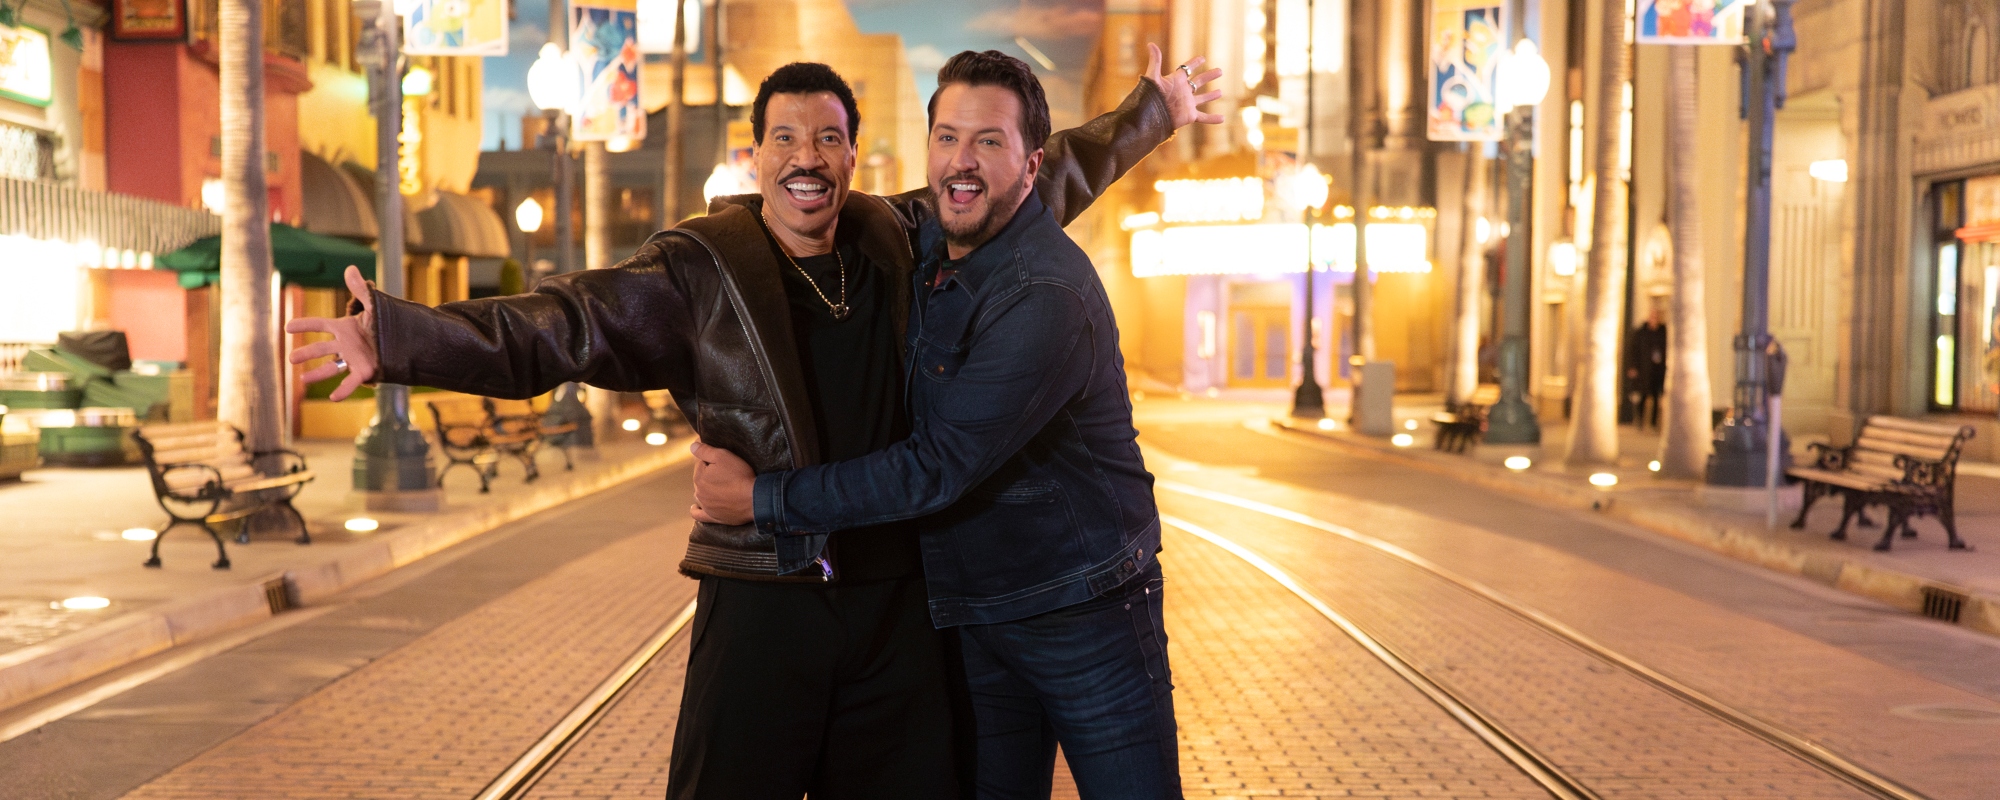 Is Luke Bryan Feuding with Lionel Richie? The ‘American Idol’ Judge Clears the Air